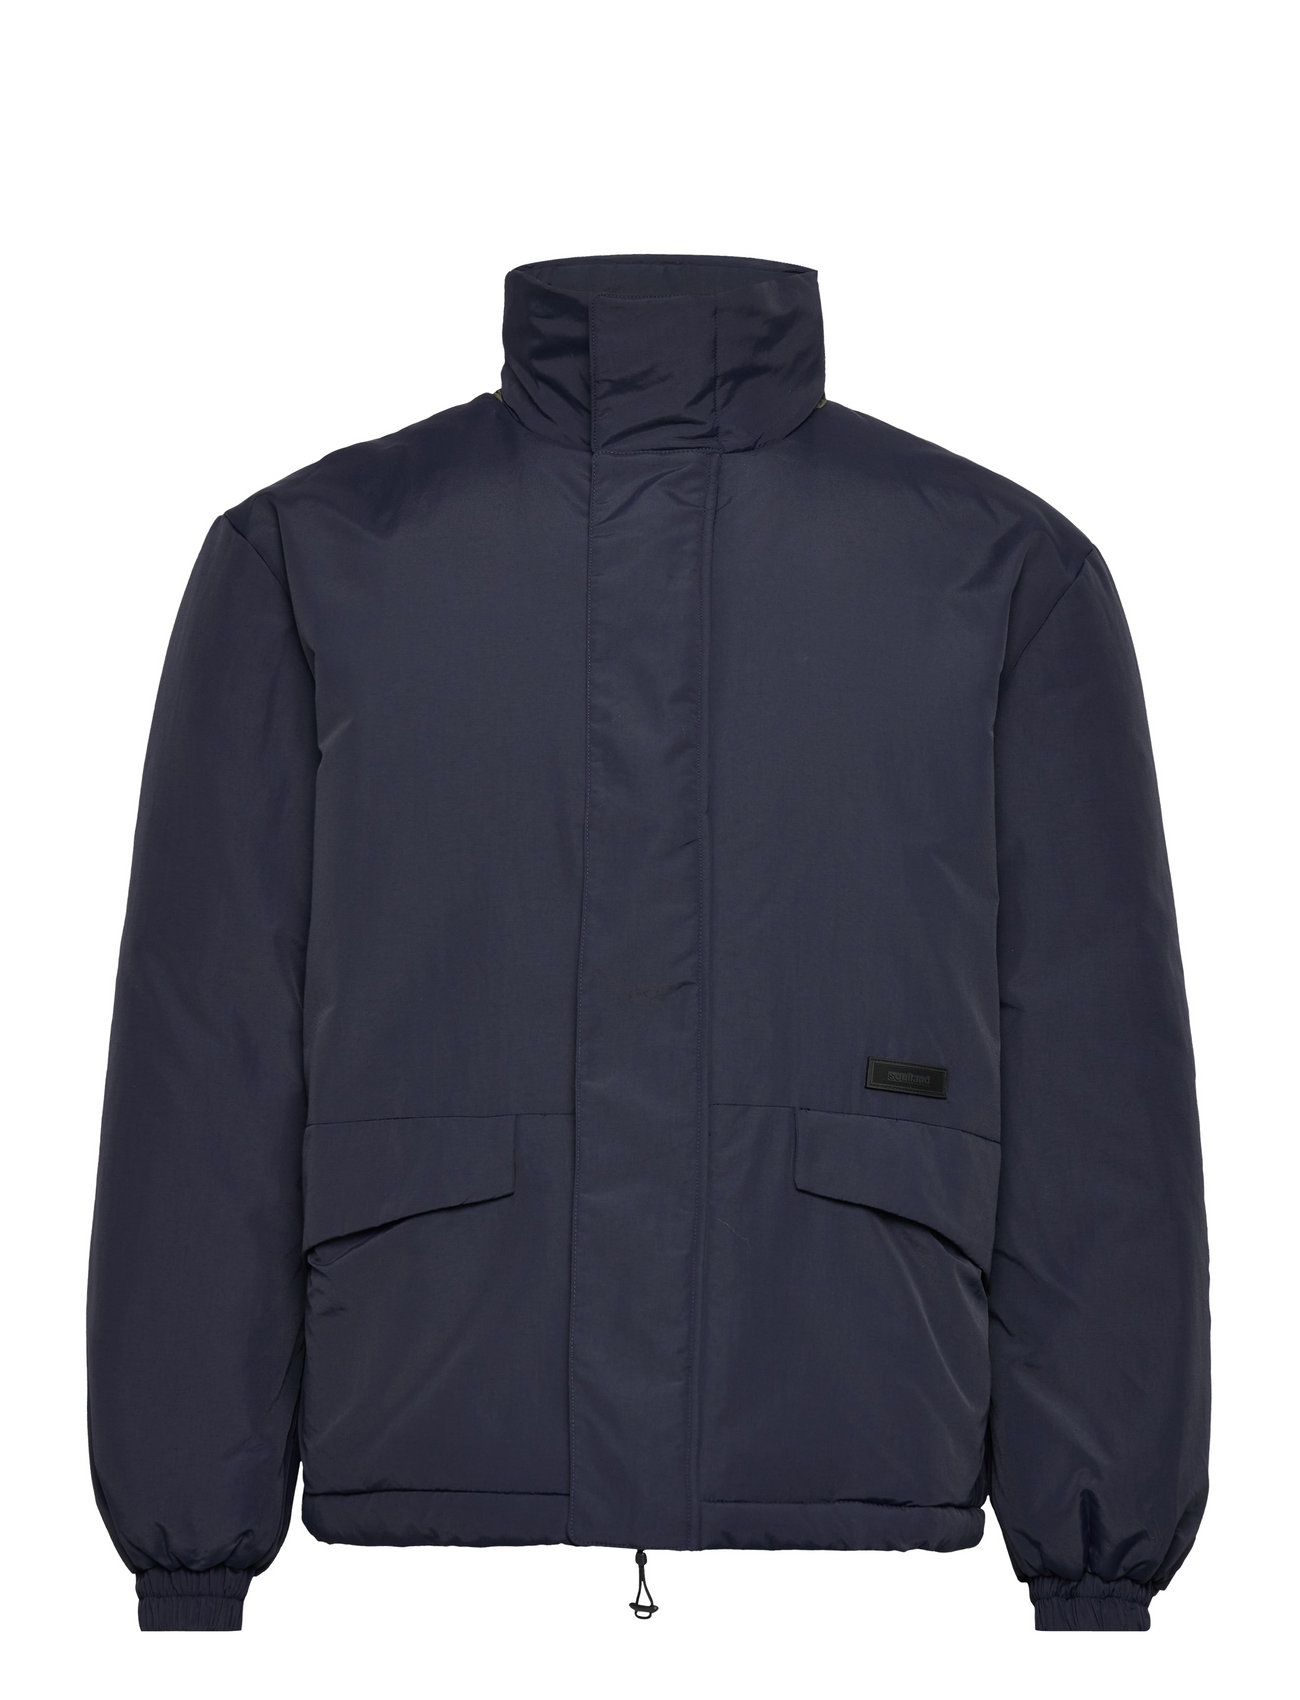 Soulland Jim Jacket - 395 €. Buy Padded jackets from Soulland online at ...